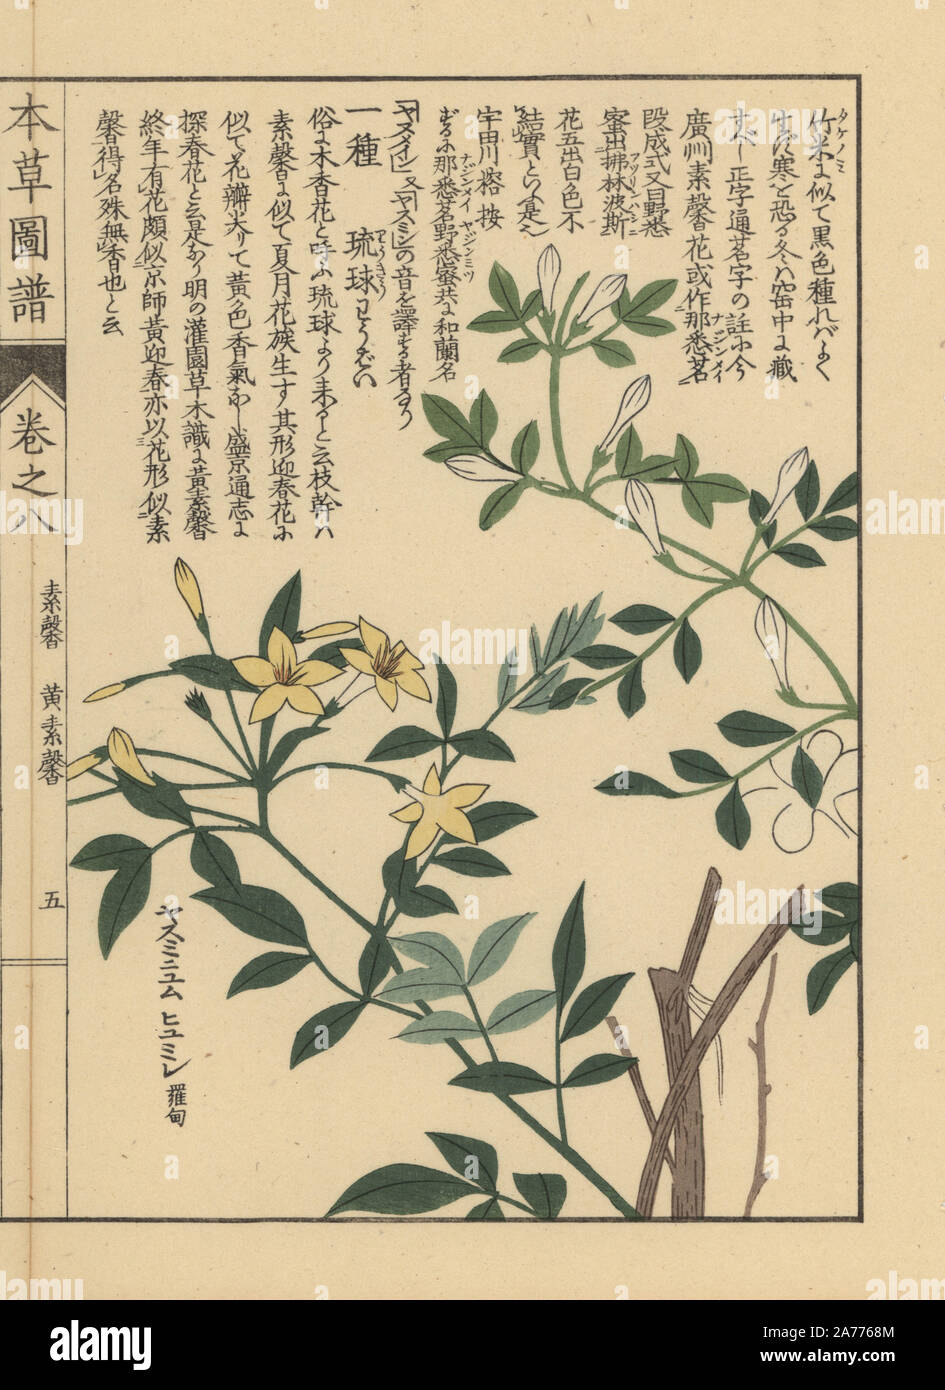 Showy jasmine, Jasminum floridum. Colour-printed woodblock engraving by Kan'en Iwasaki from 'Honzo Zufu,' an Illustrated Guide to Medicinal Plants, Japan, 1884. Iwasaki (1786-1842) was a Japanese botanist, entomologist and zoologist. He was one of the first Japanese botanists to incorporate western knowledge into his studies. Stock Photo